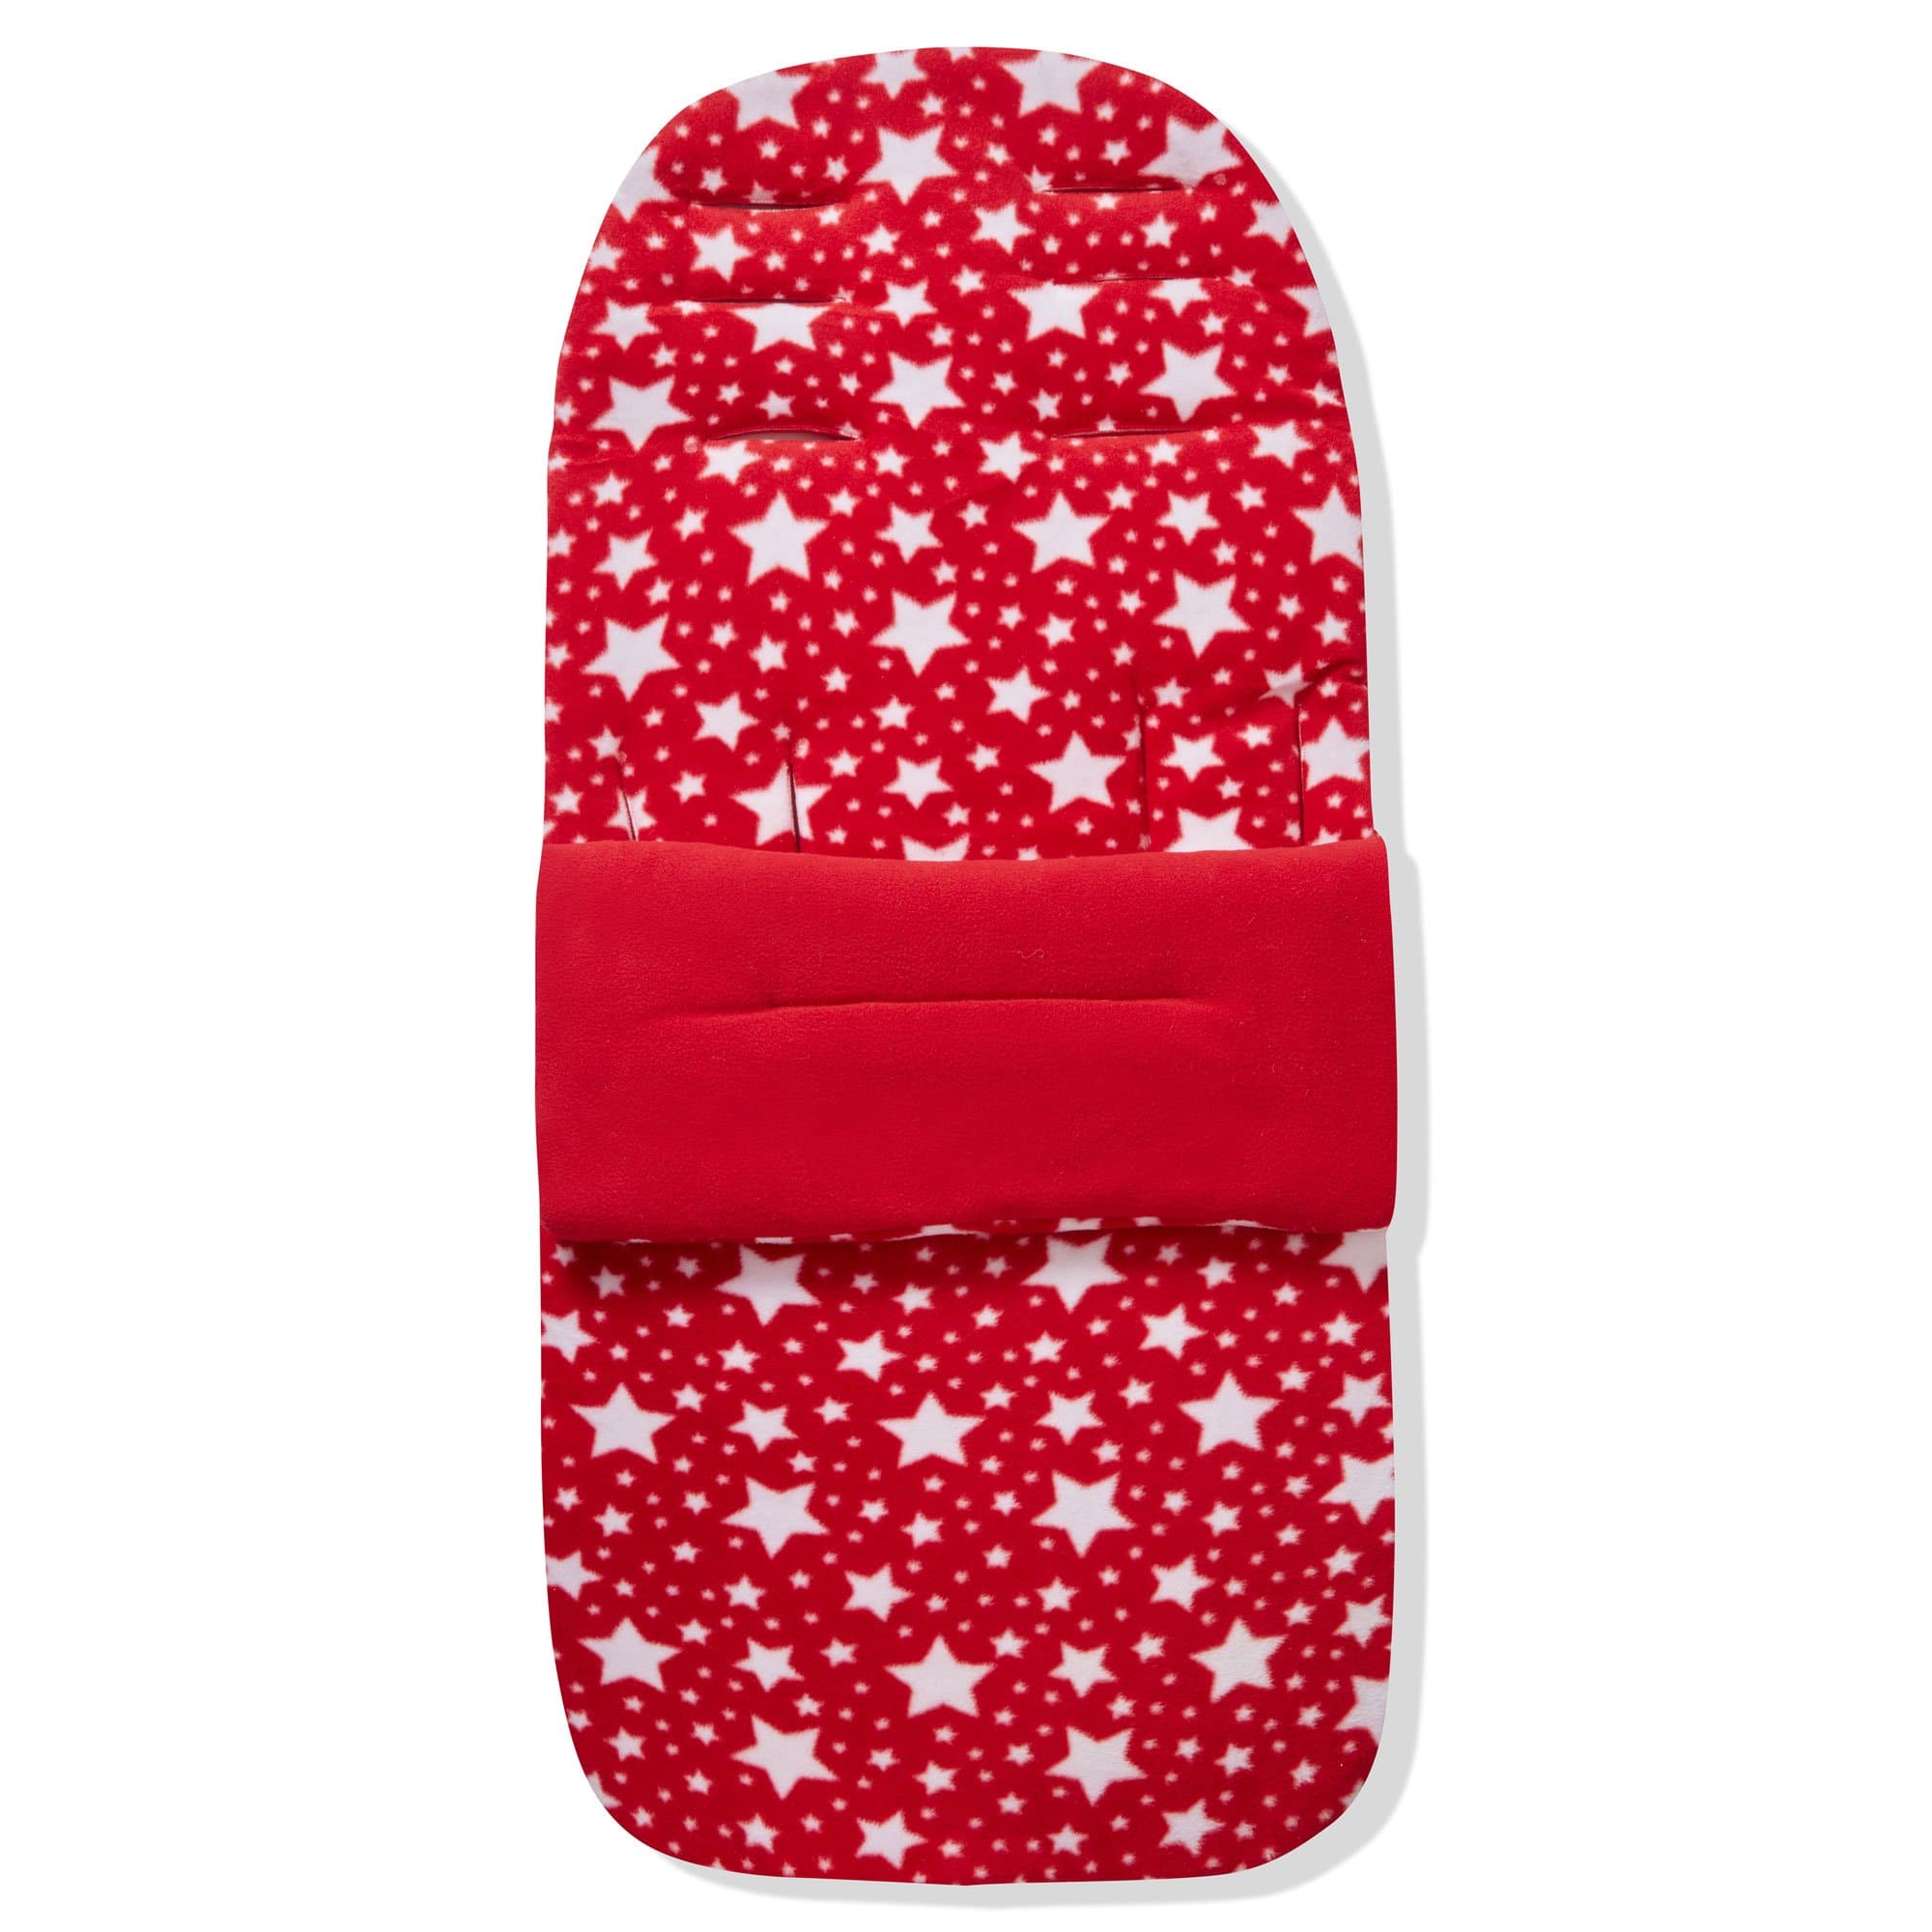 Fleece Footmuff / Cosy Toes Compatible with Venicci - For Your Little One